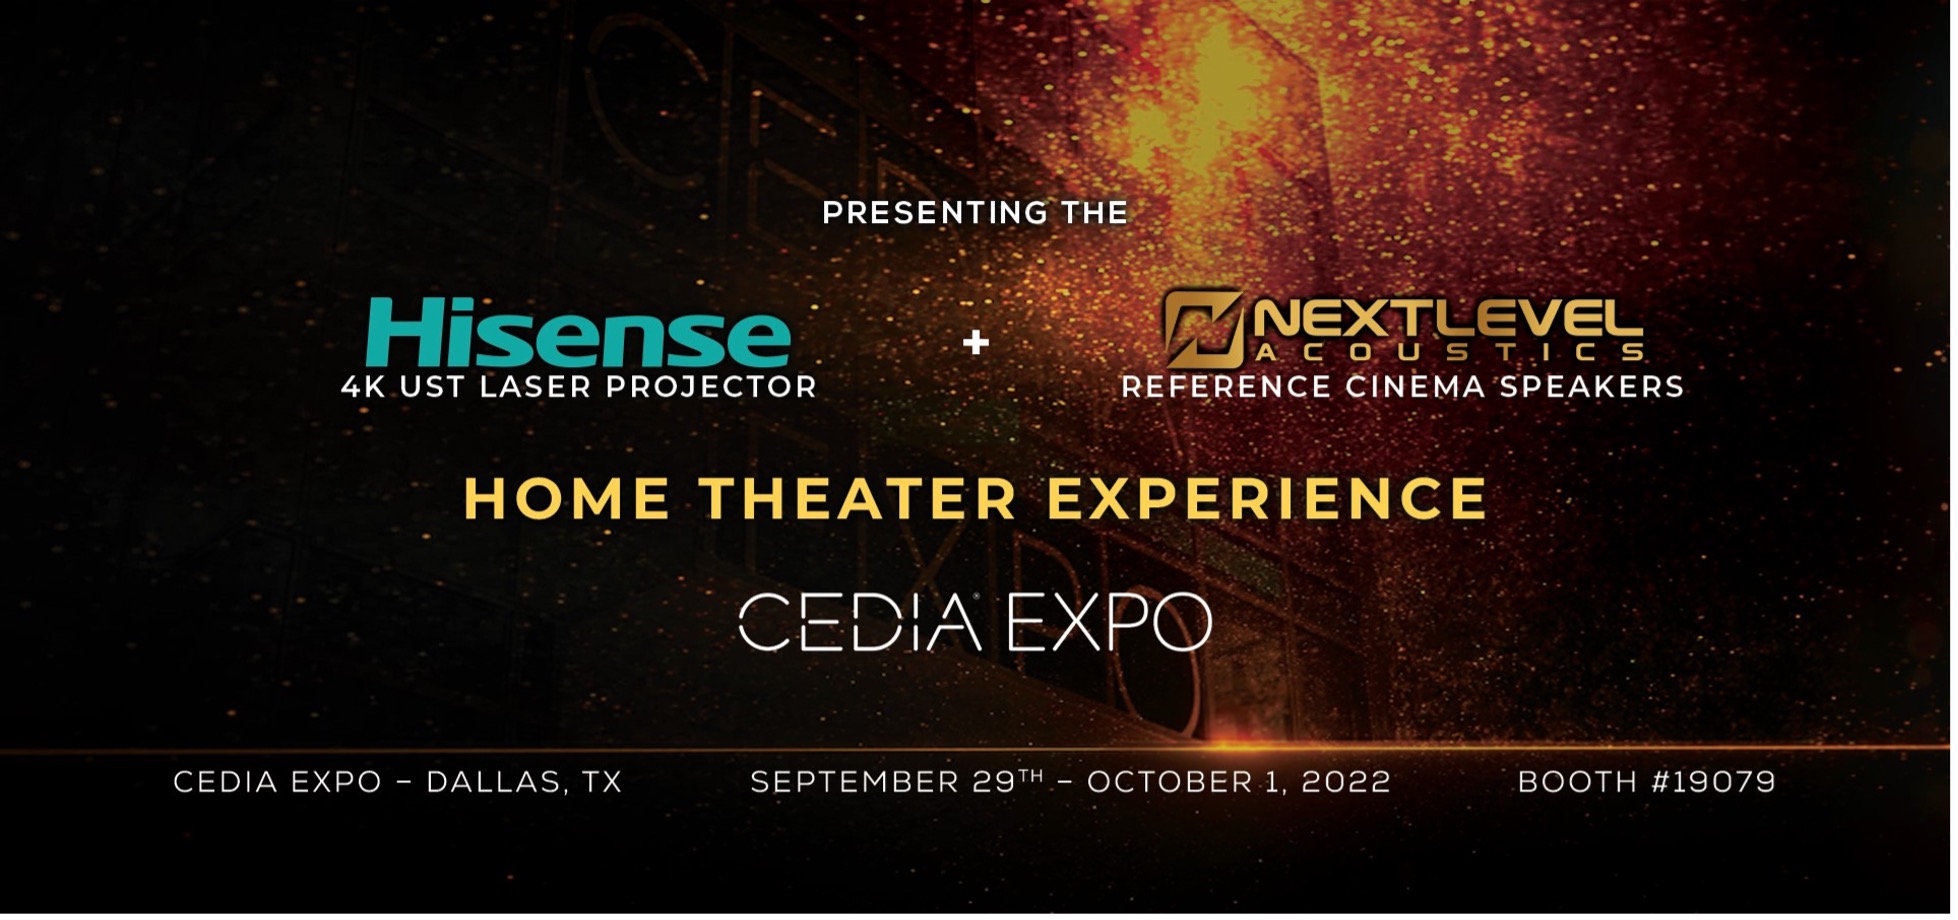 Visit the Hisense and NextLevel Acoustics “Ultimate Home Theater” at CEDIA 2022